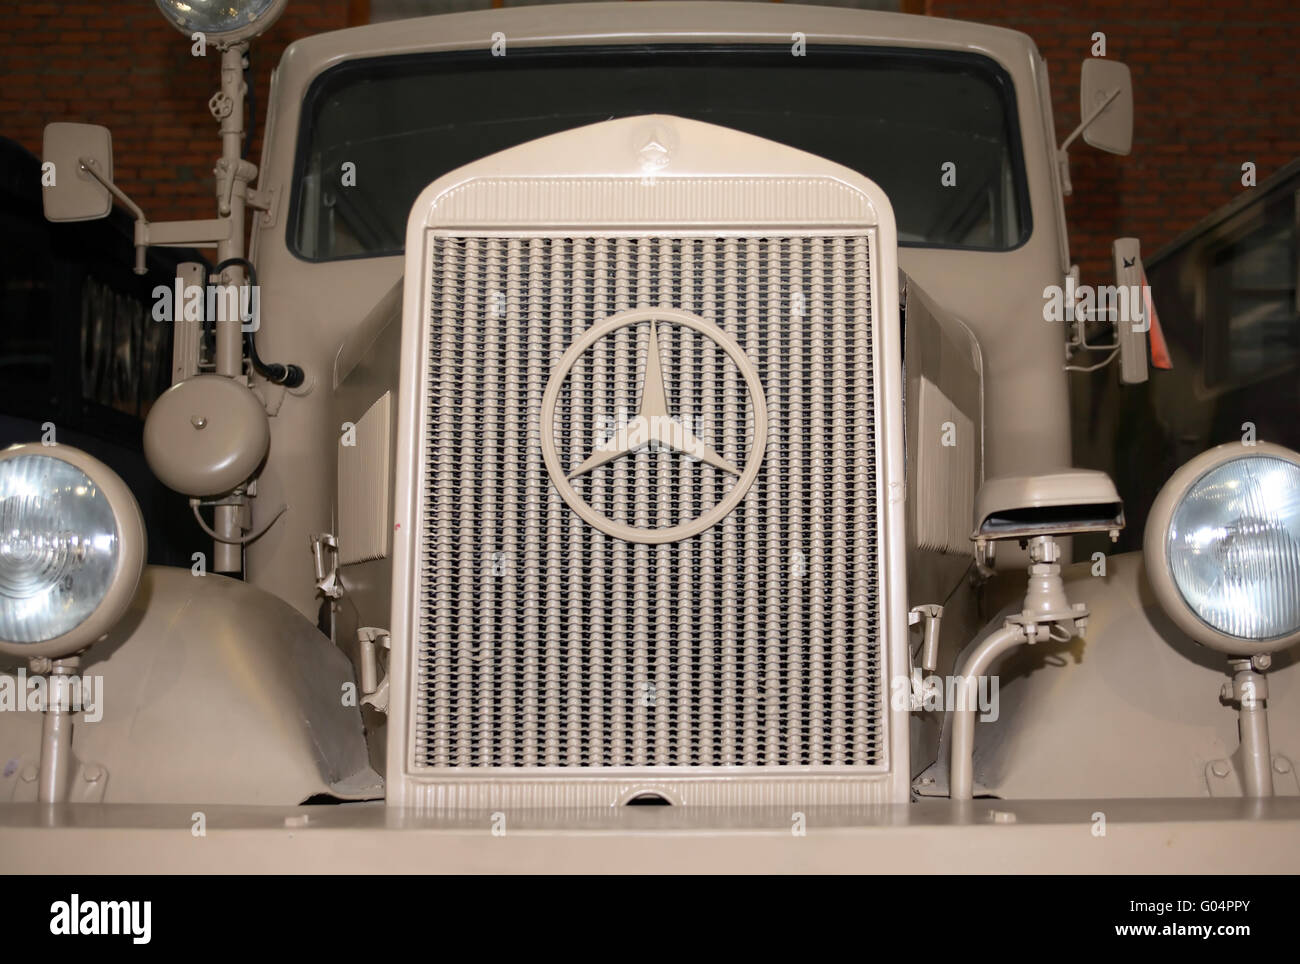 CHERNOGOLOVKA, RUSSIA - APRIL 11, 2015: Closeup of radiator grille and emblem of old Mercedes-Benz truck Stock Photo